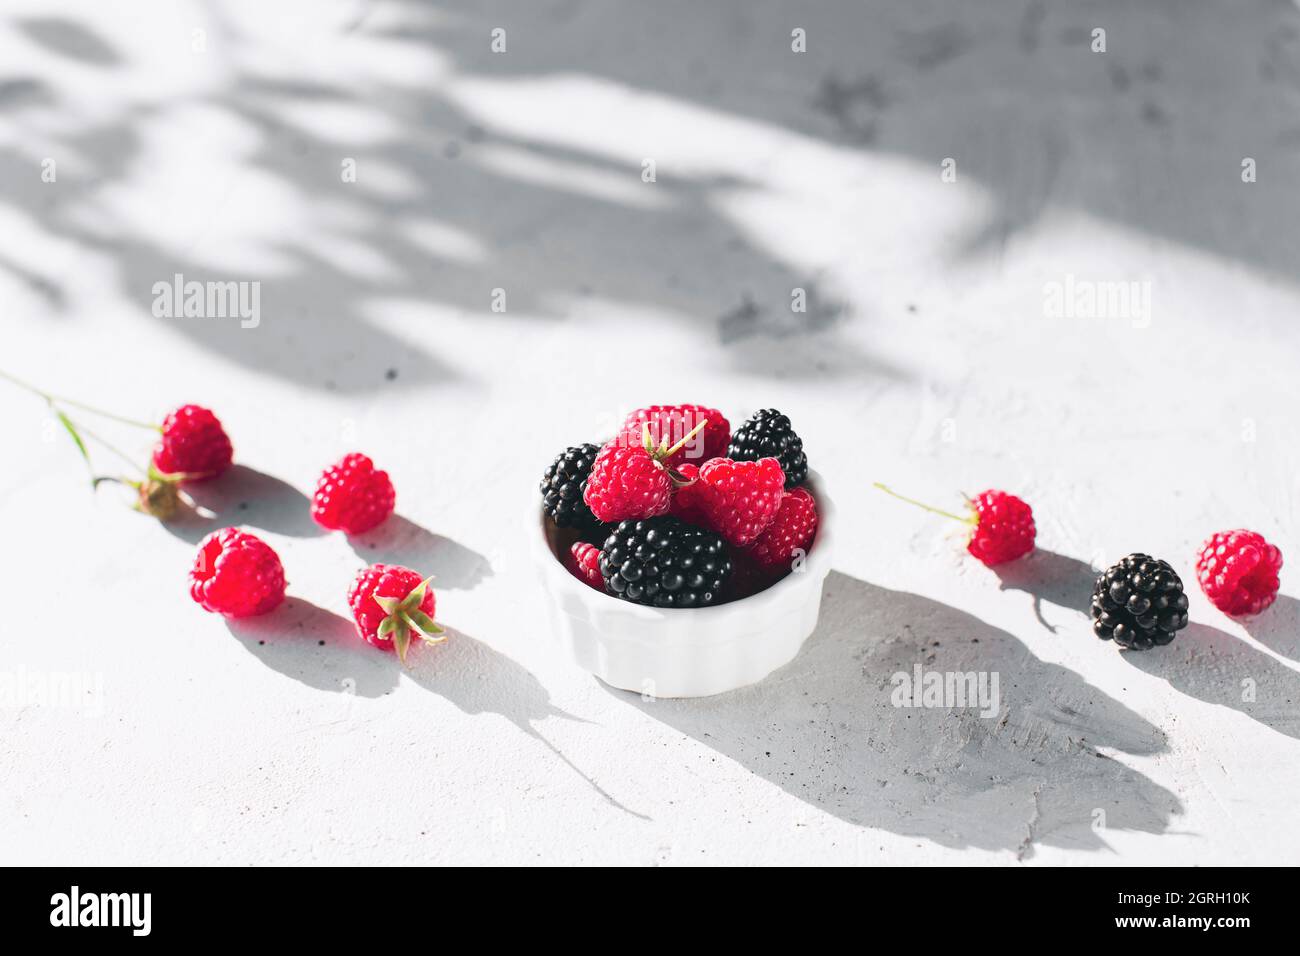 Bowl with raspberries and blackberries on gray concrete table with leaves shadow Stock Photo